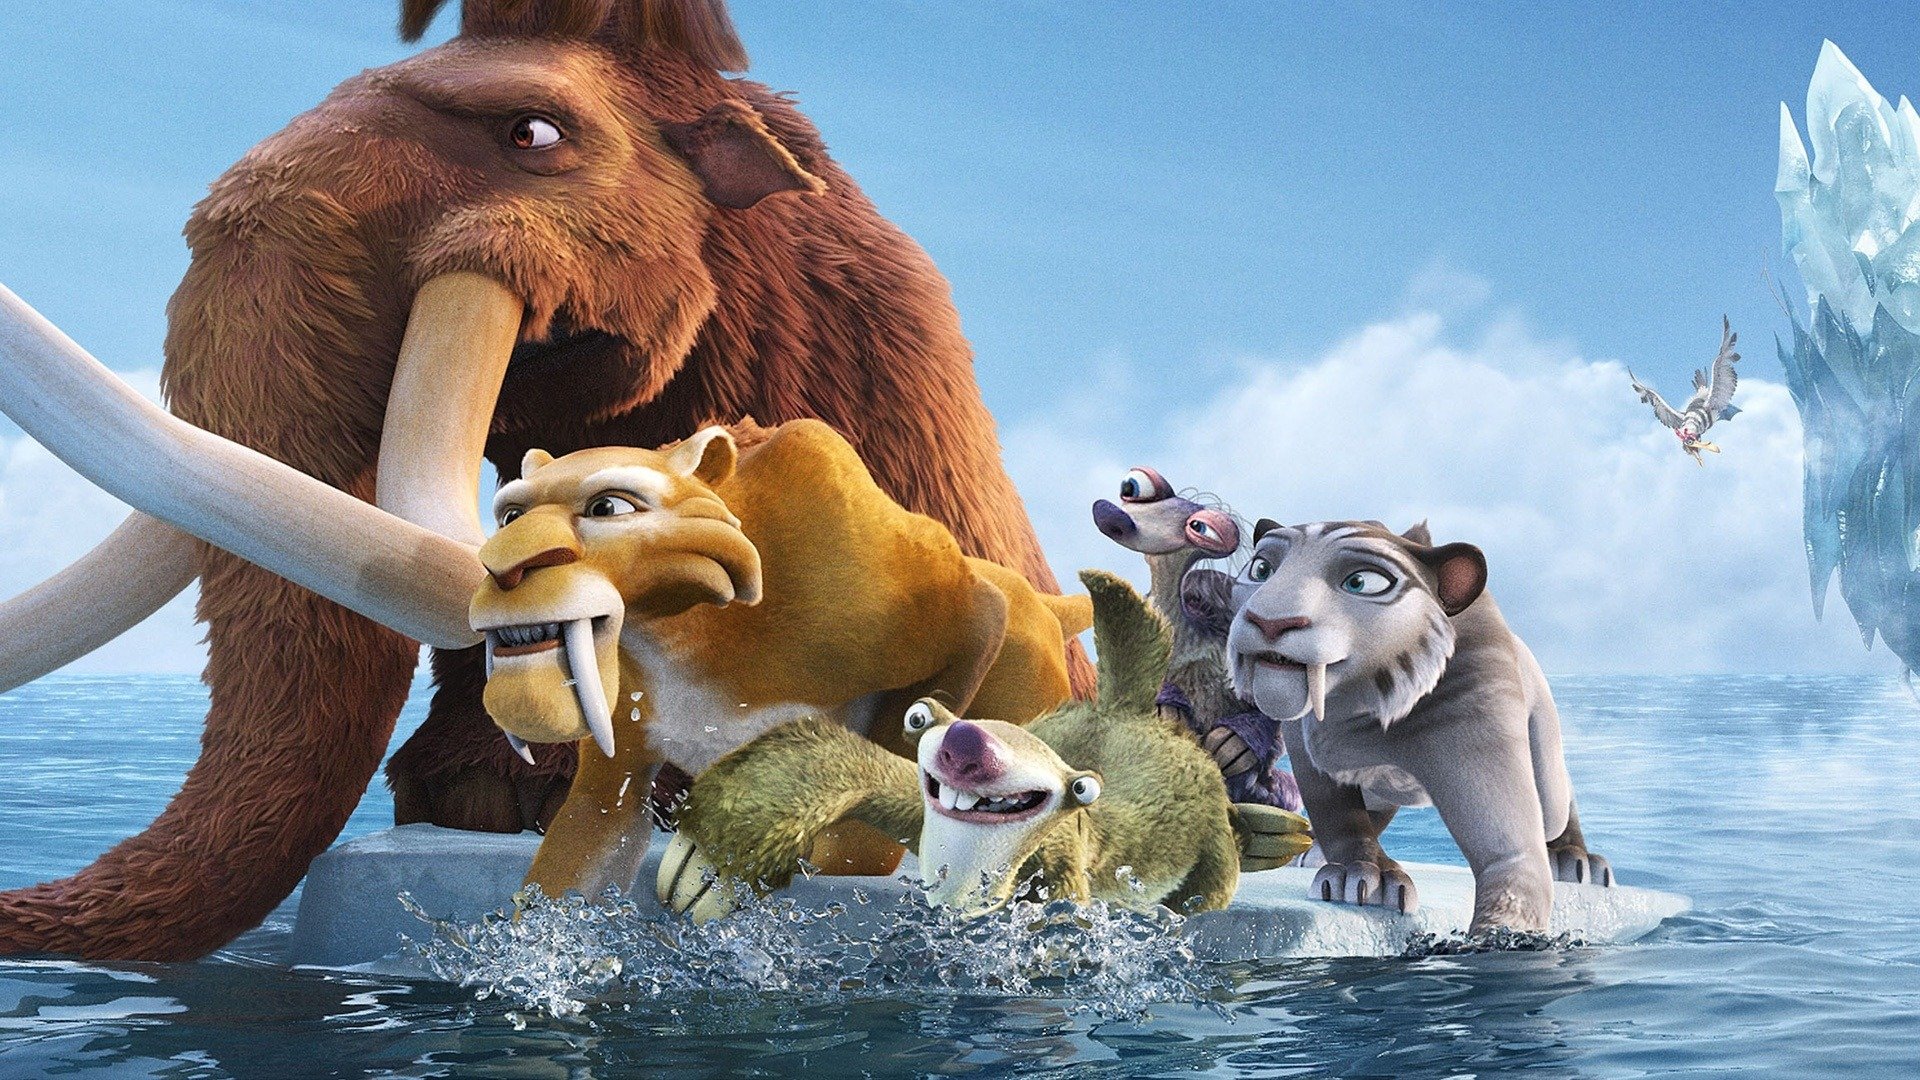 Best Ice Age: Continental Drift wallpaper ID:115502 for High Resolution full hd computer